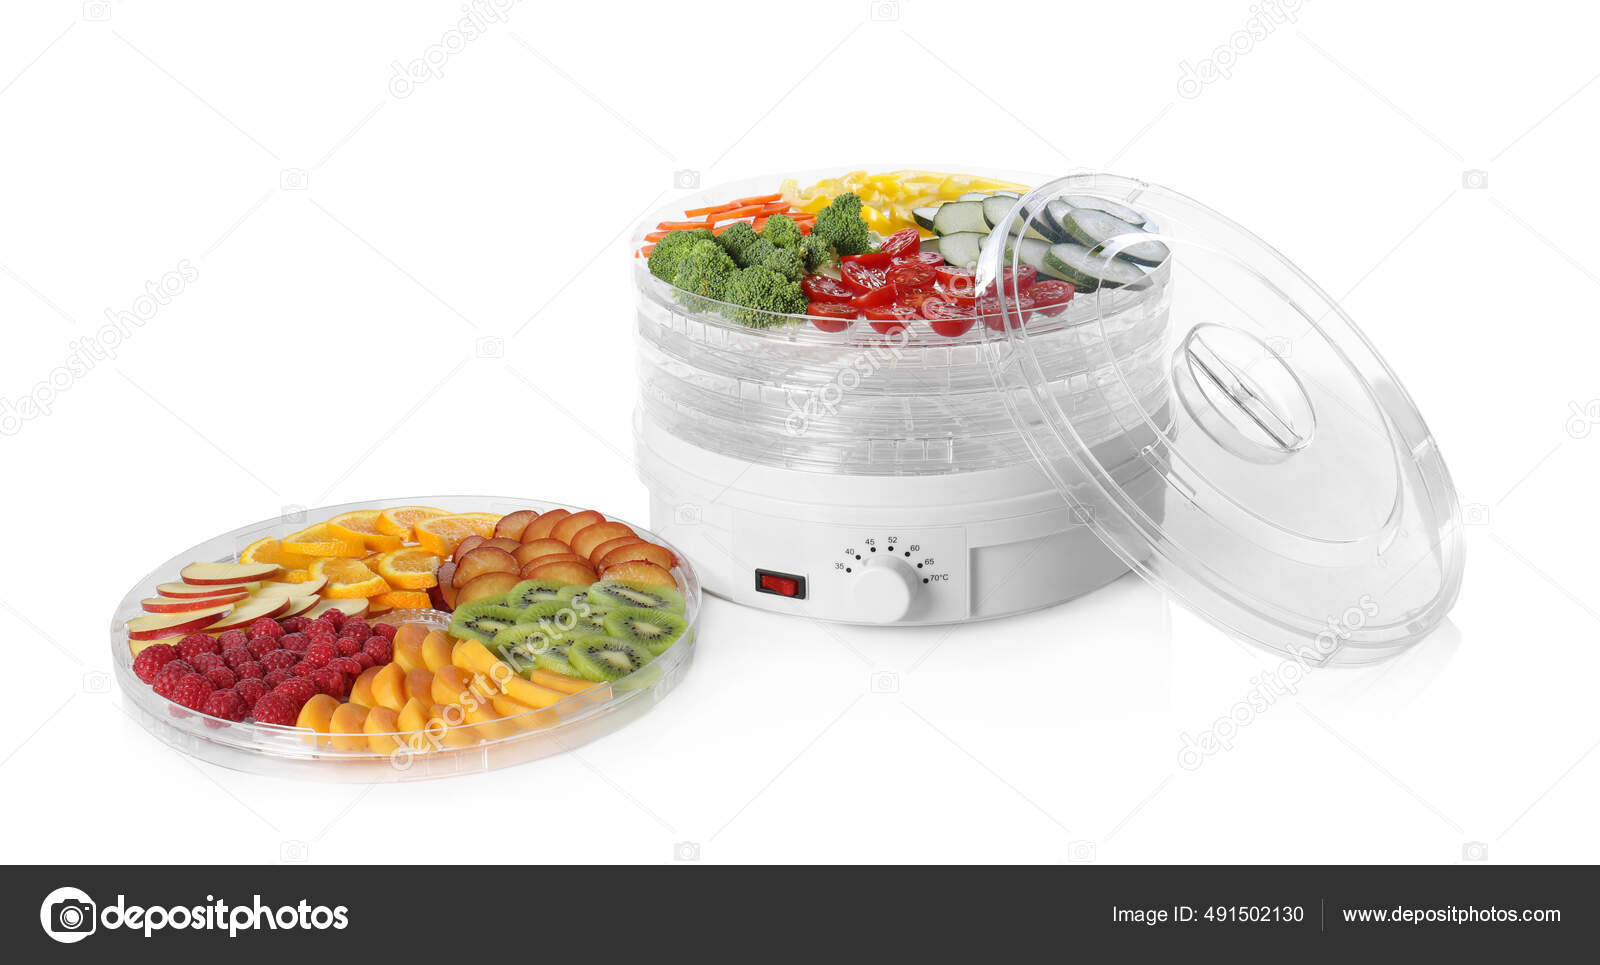 Food dehydrator isolated Stock Photos, Royalty Free Food isolated Images | Depositphotos